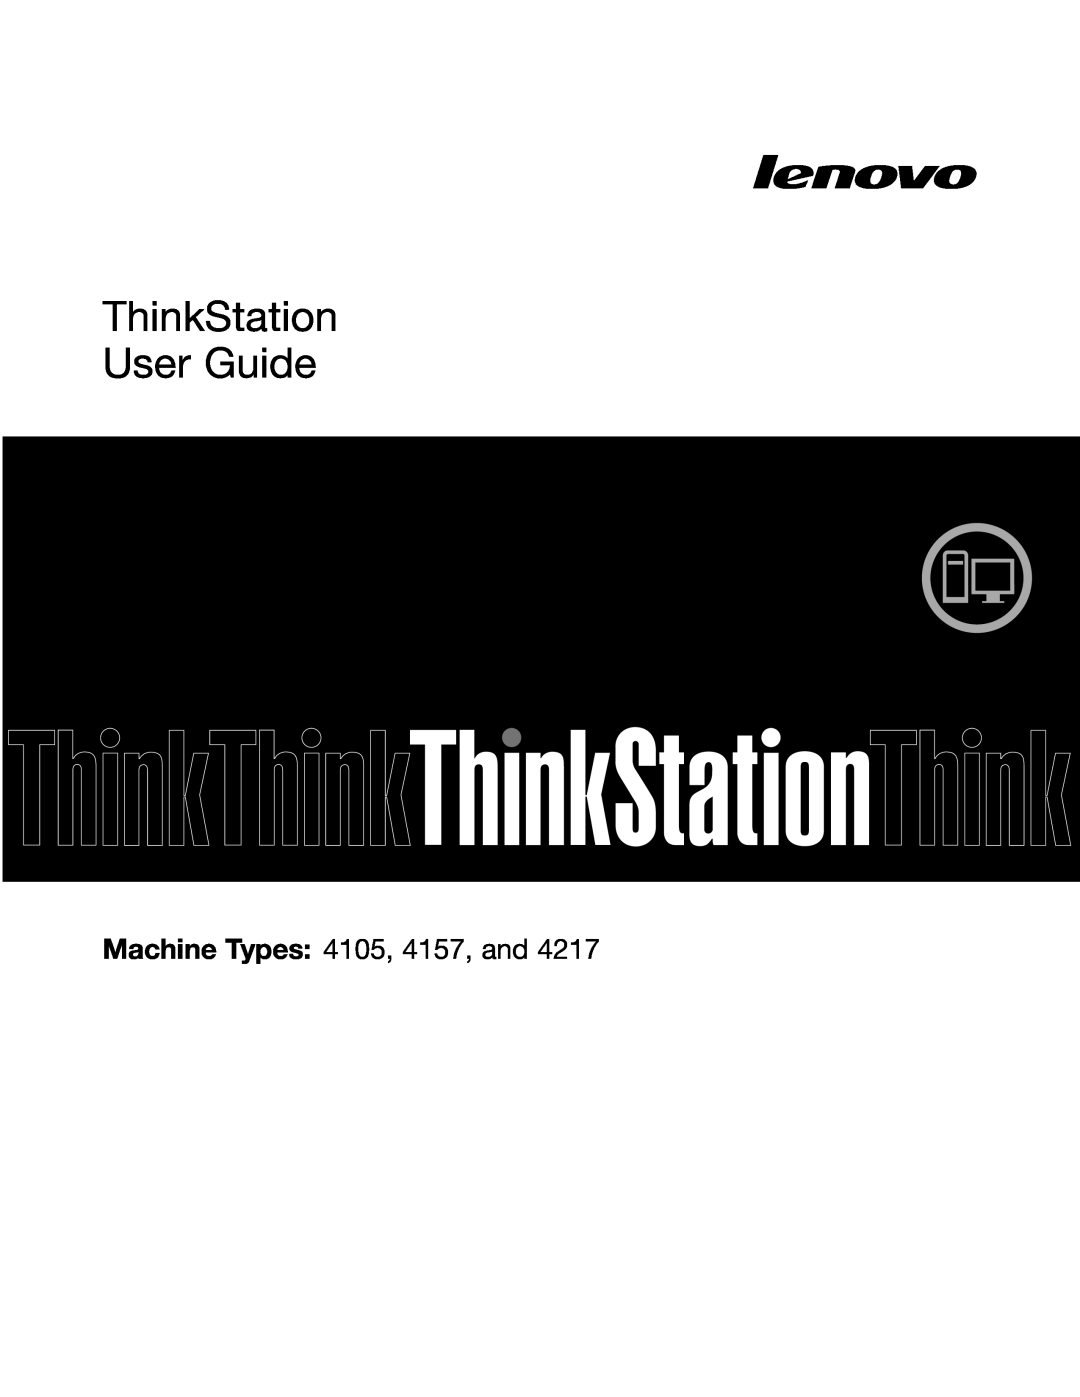 Lenovo 4217 manual ThinkStation User Guide, Machine Types 4105, 4157, and 